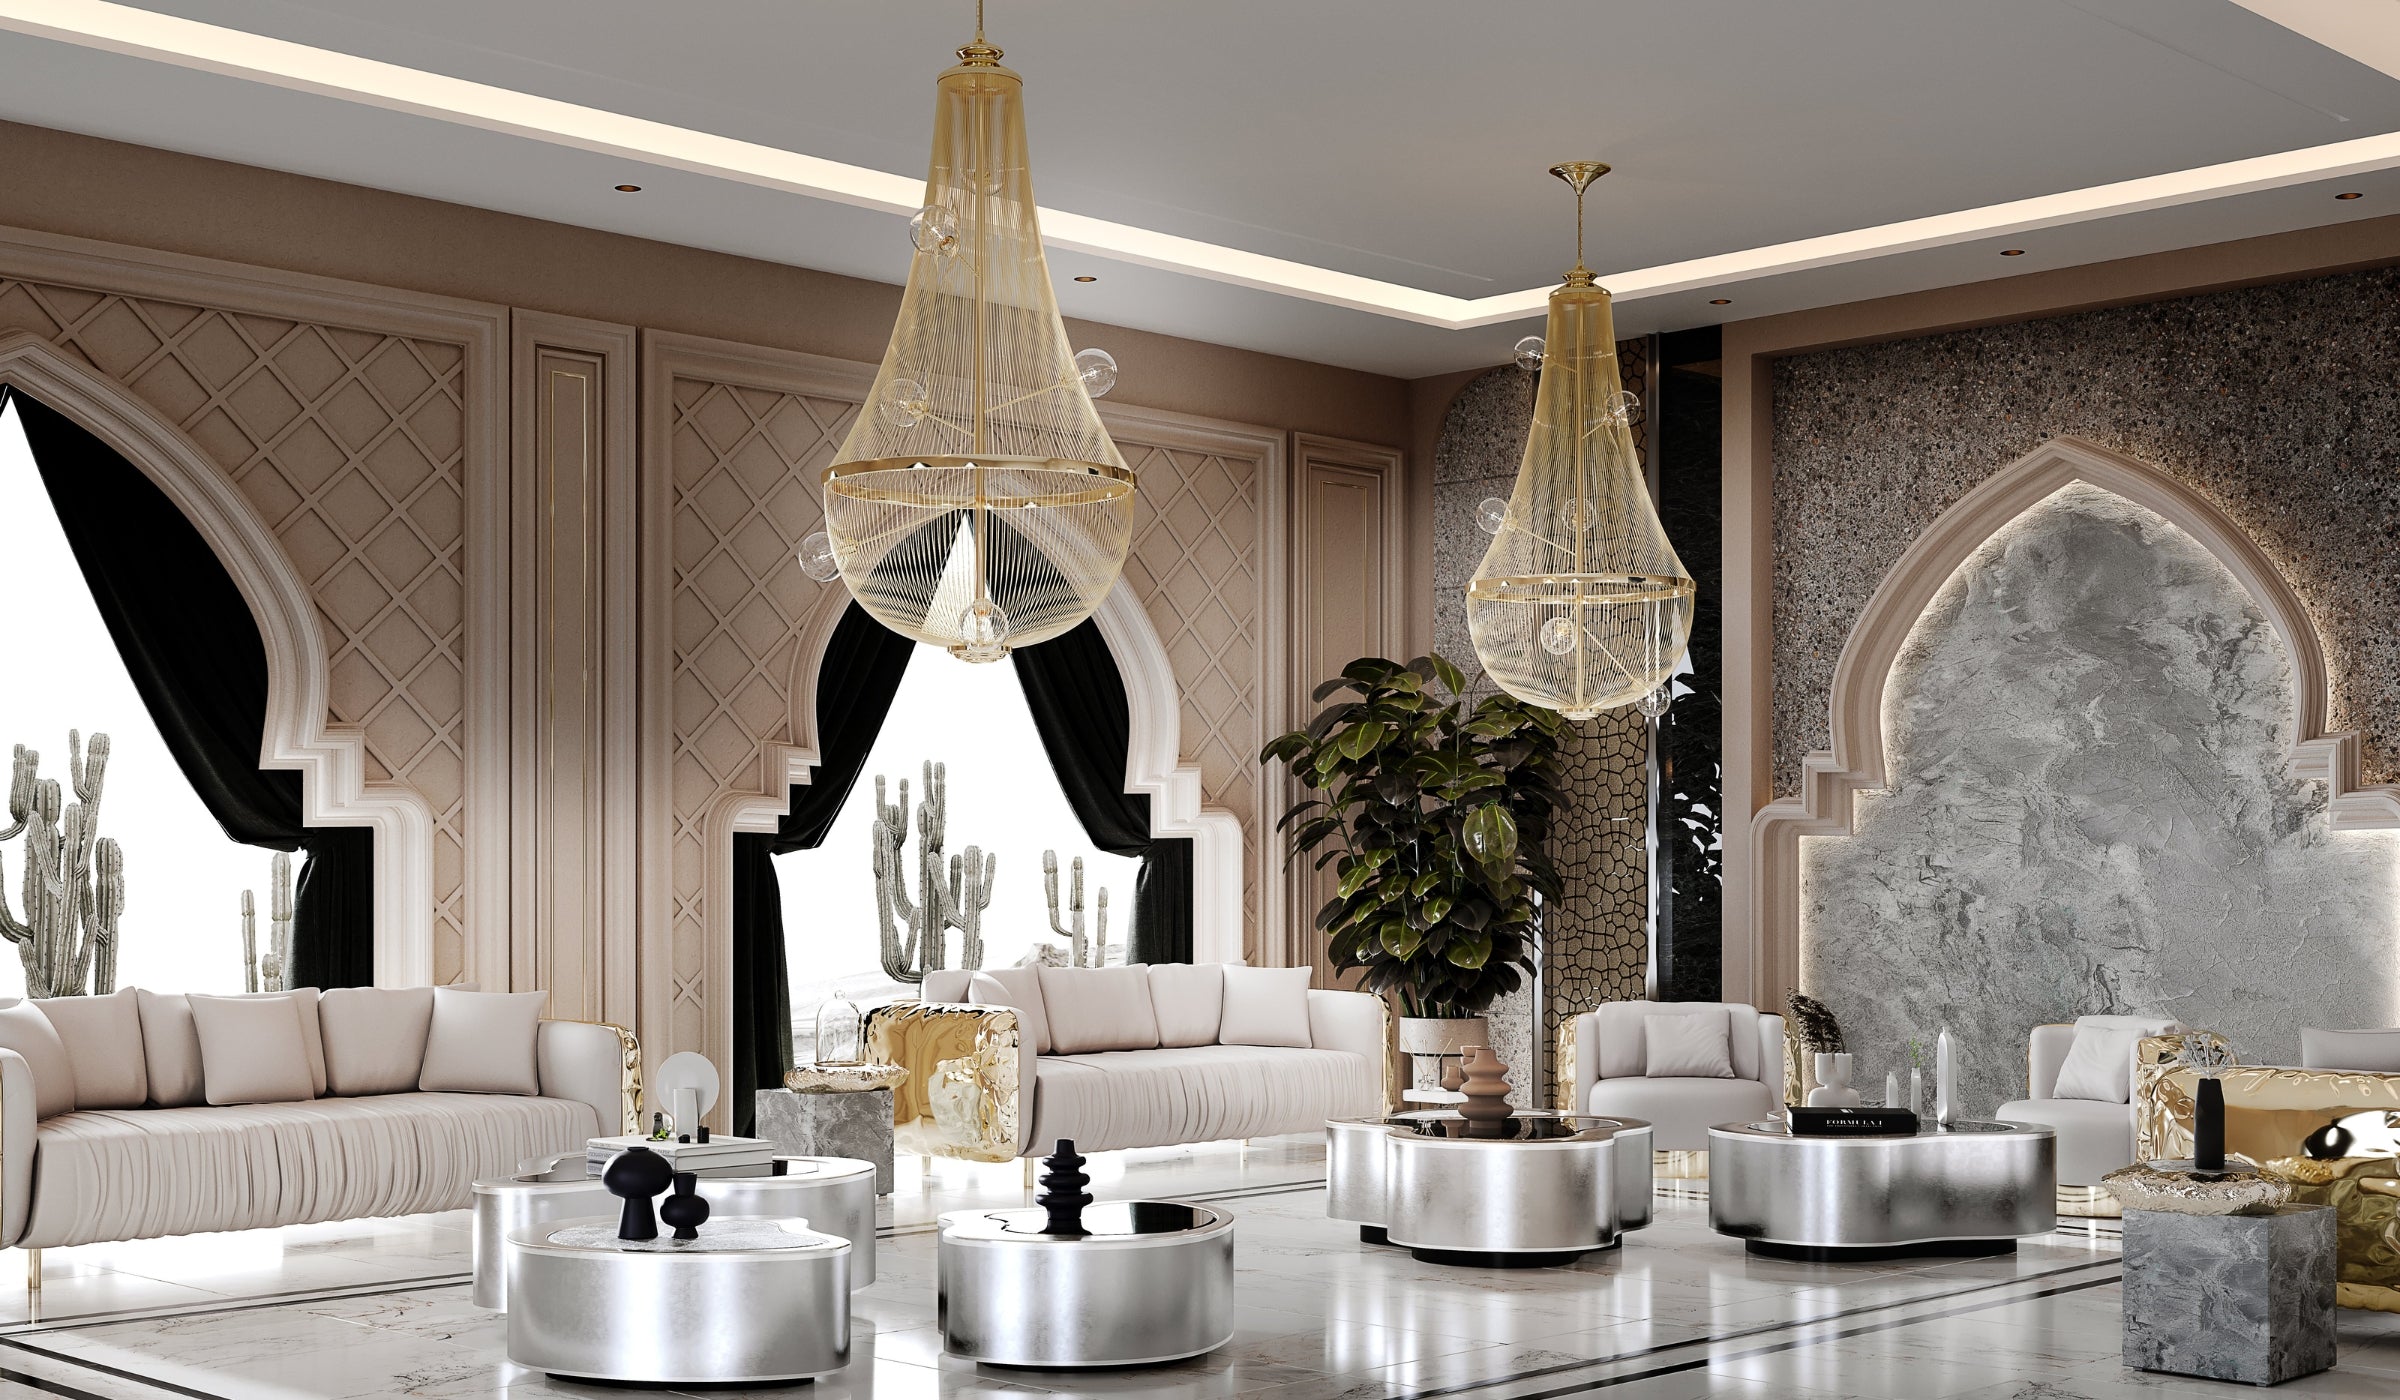 L'Chandelier - Gold-plated brass pendant light for a Parisian touch